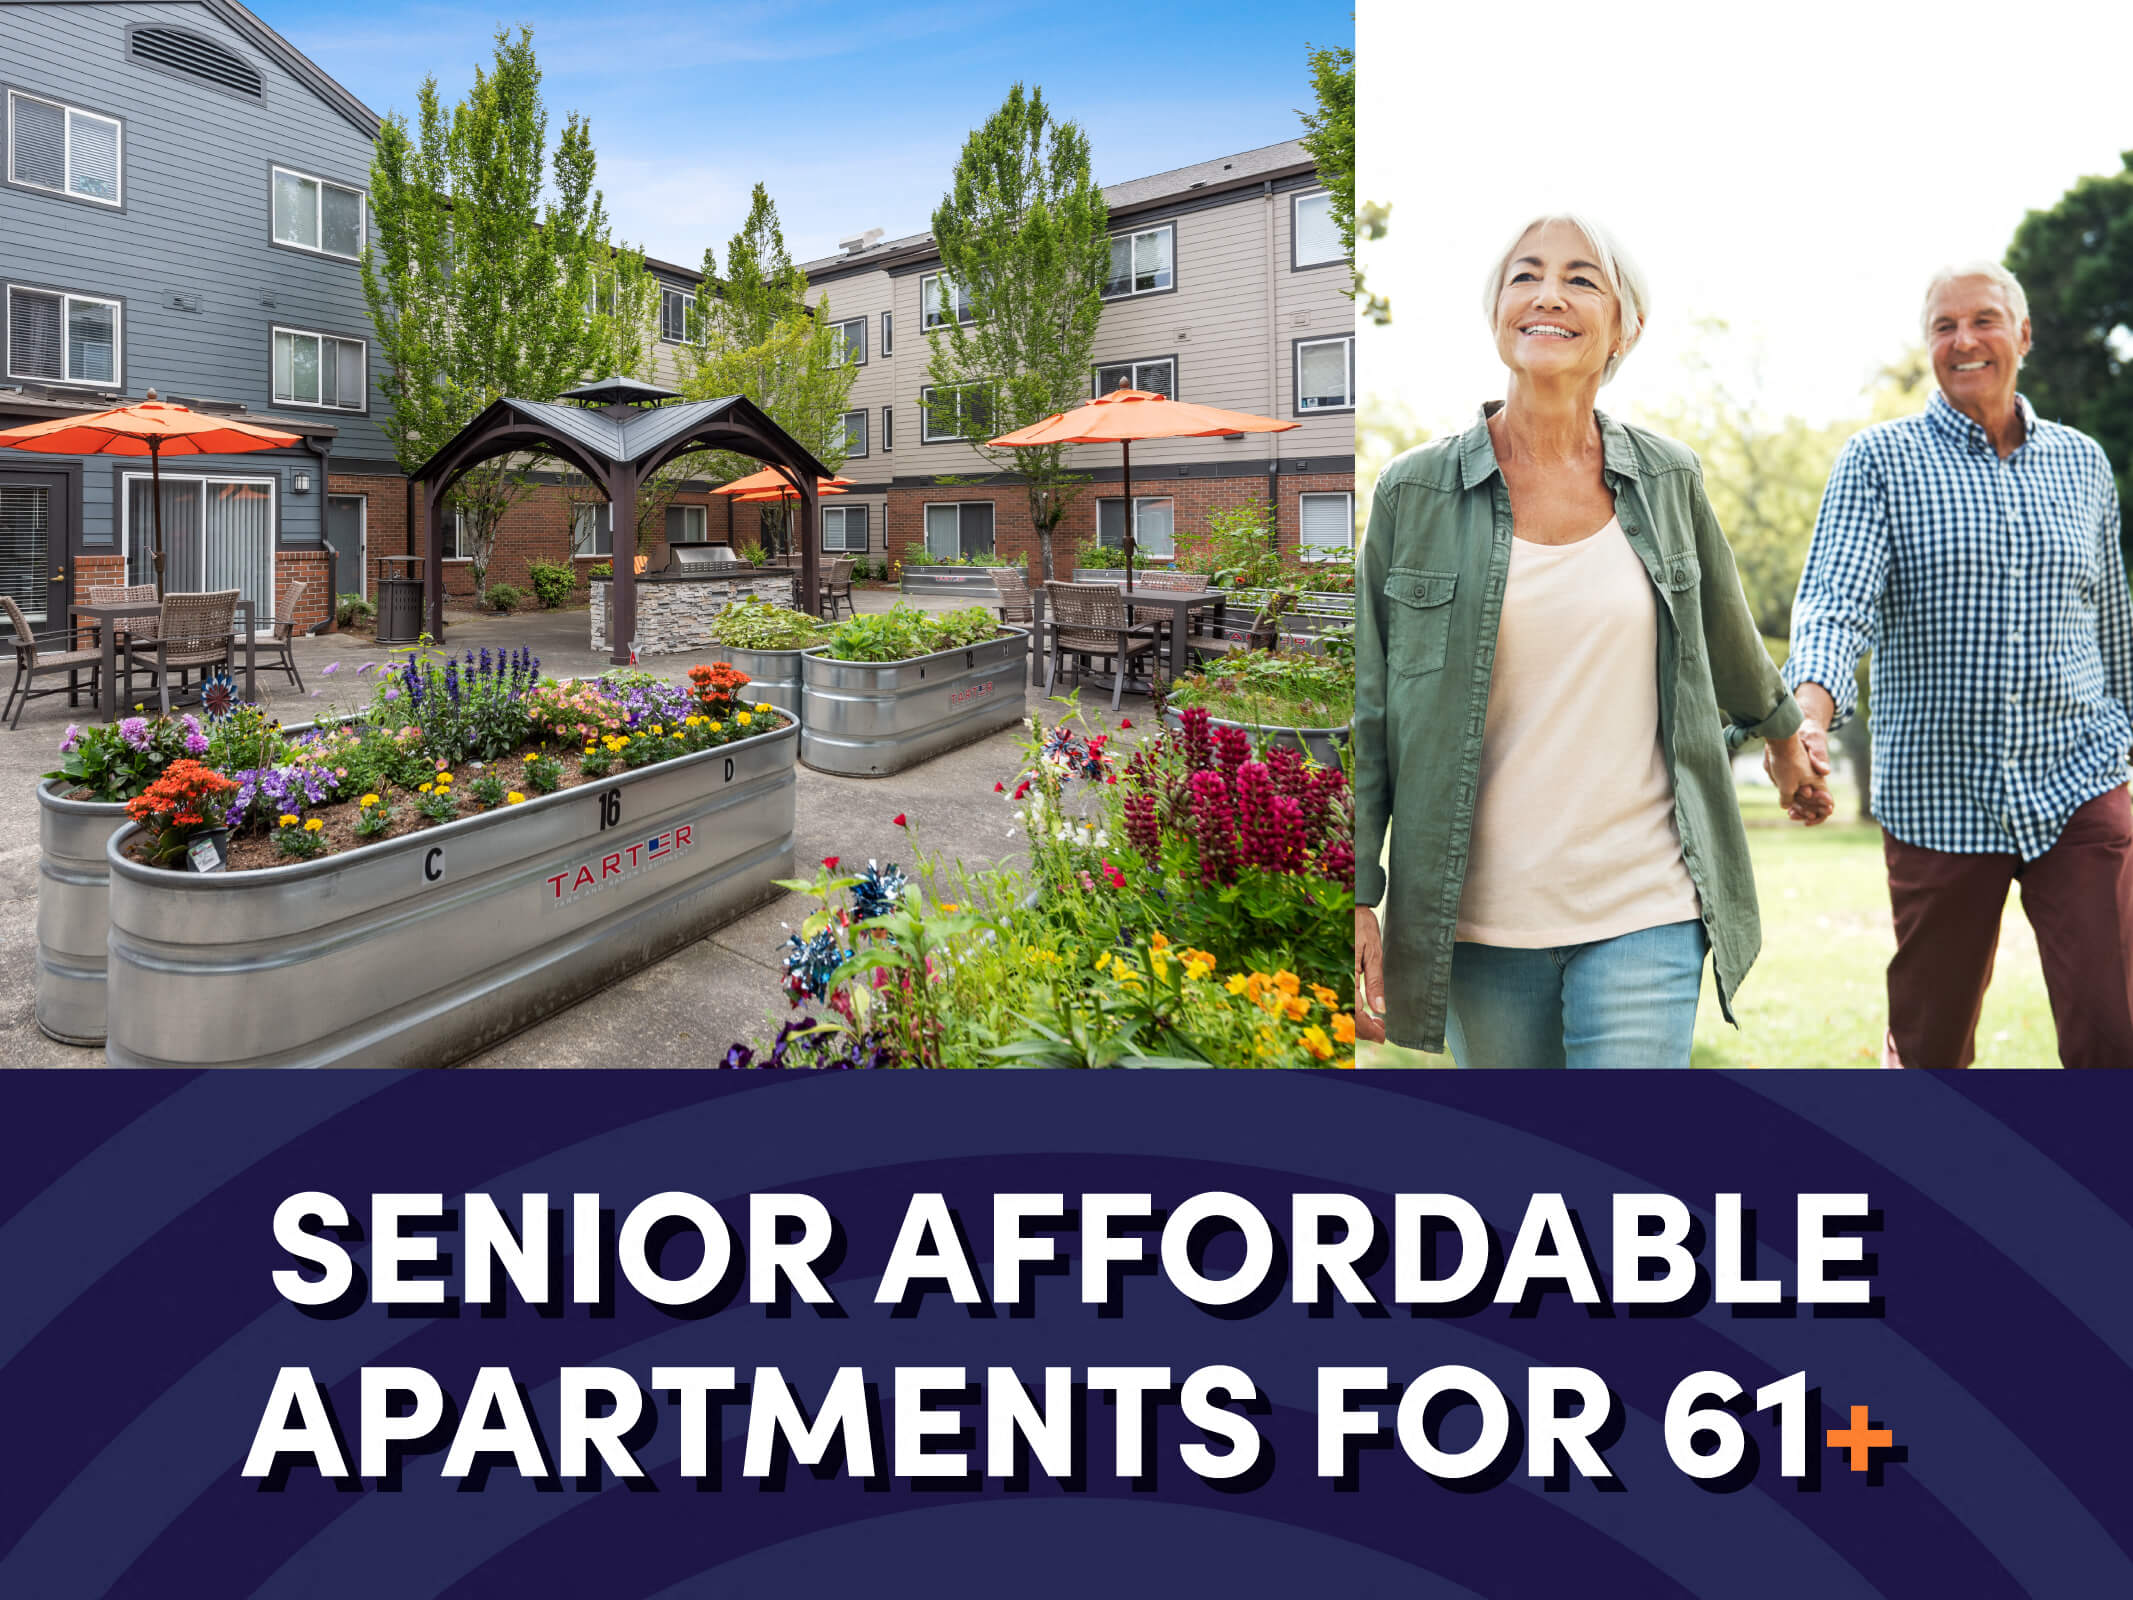 An image of walkways surrounded by lush landscaping next to an image of a senior couple holding hands above text that reads “Senior Affordable Apartments for 61+” for the Meridian Court Senior Affordable Apartments in Federal Way, Washington.